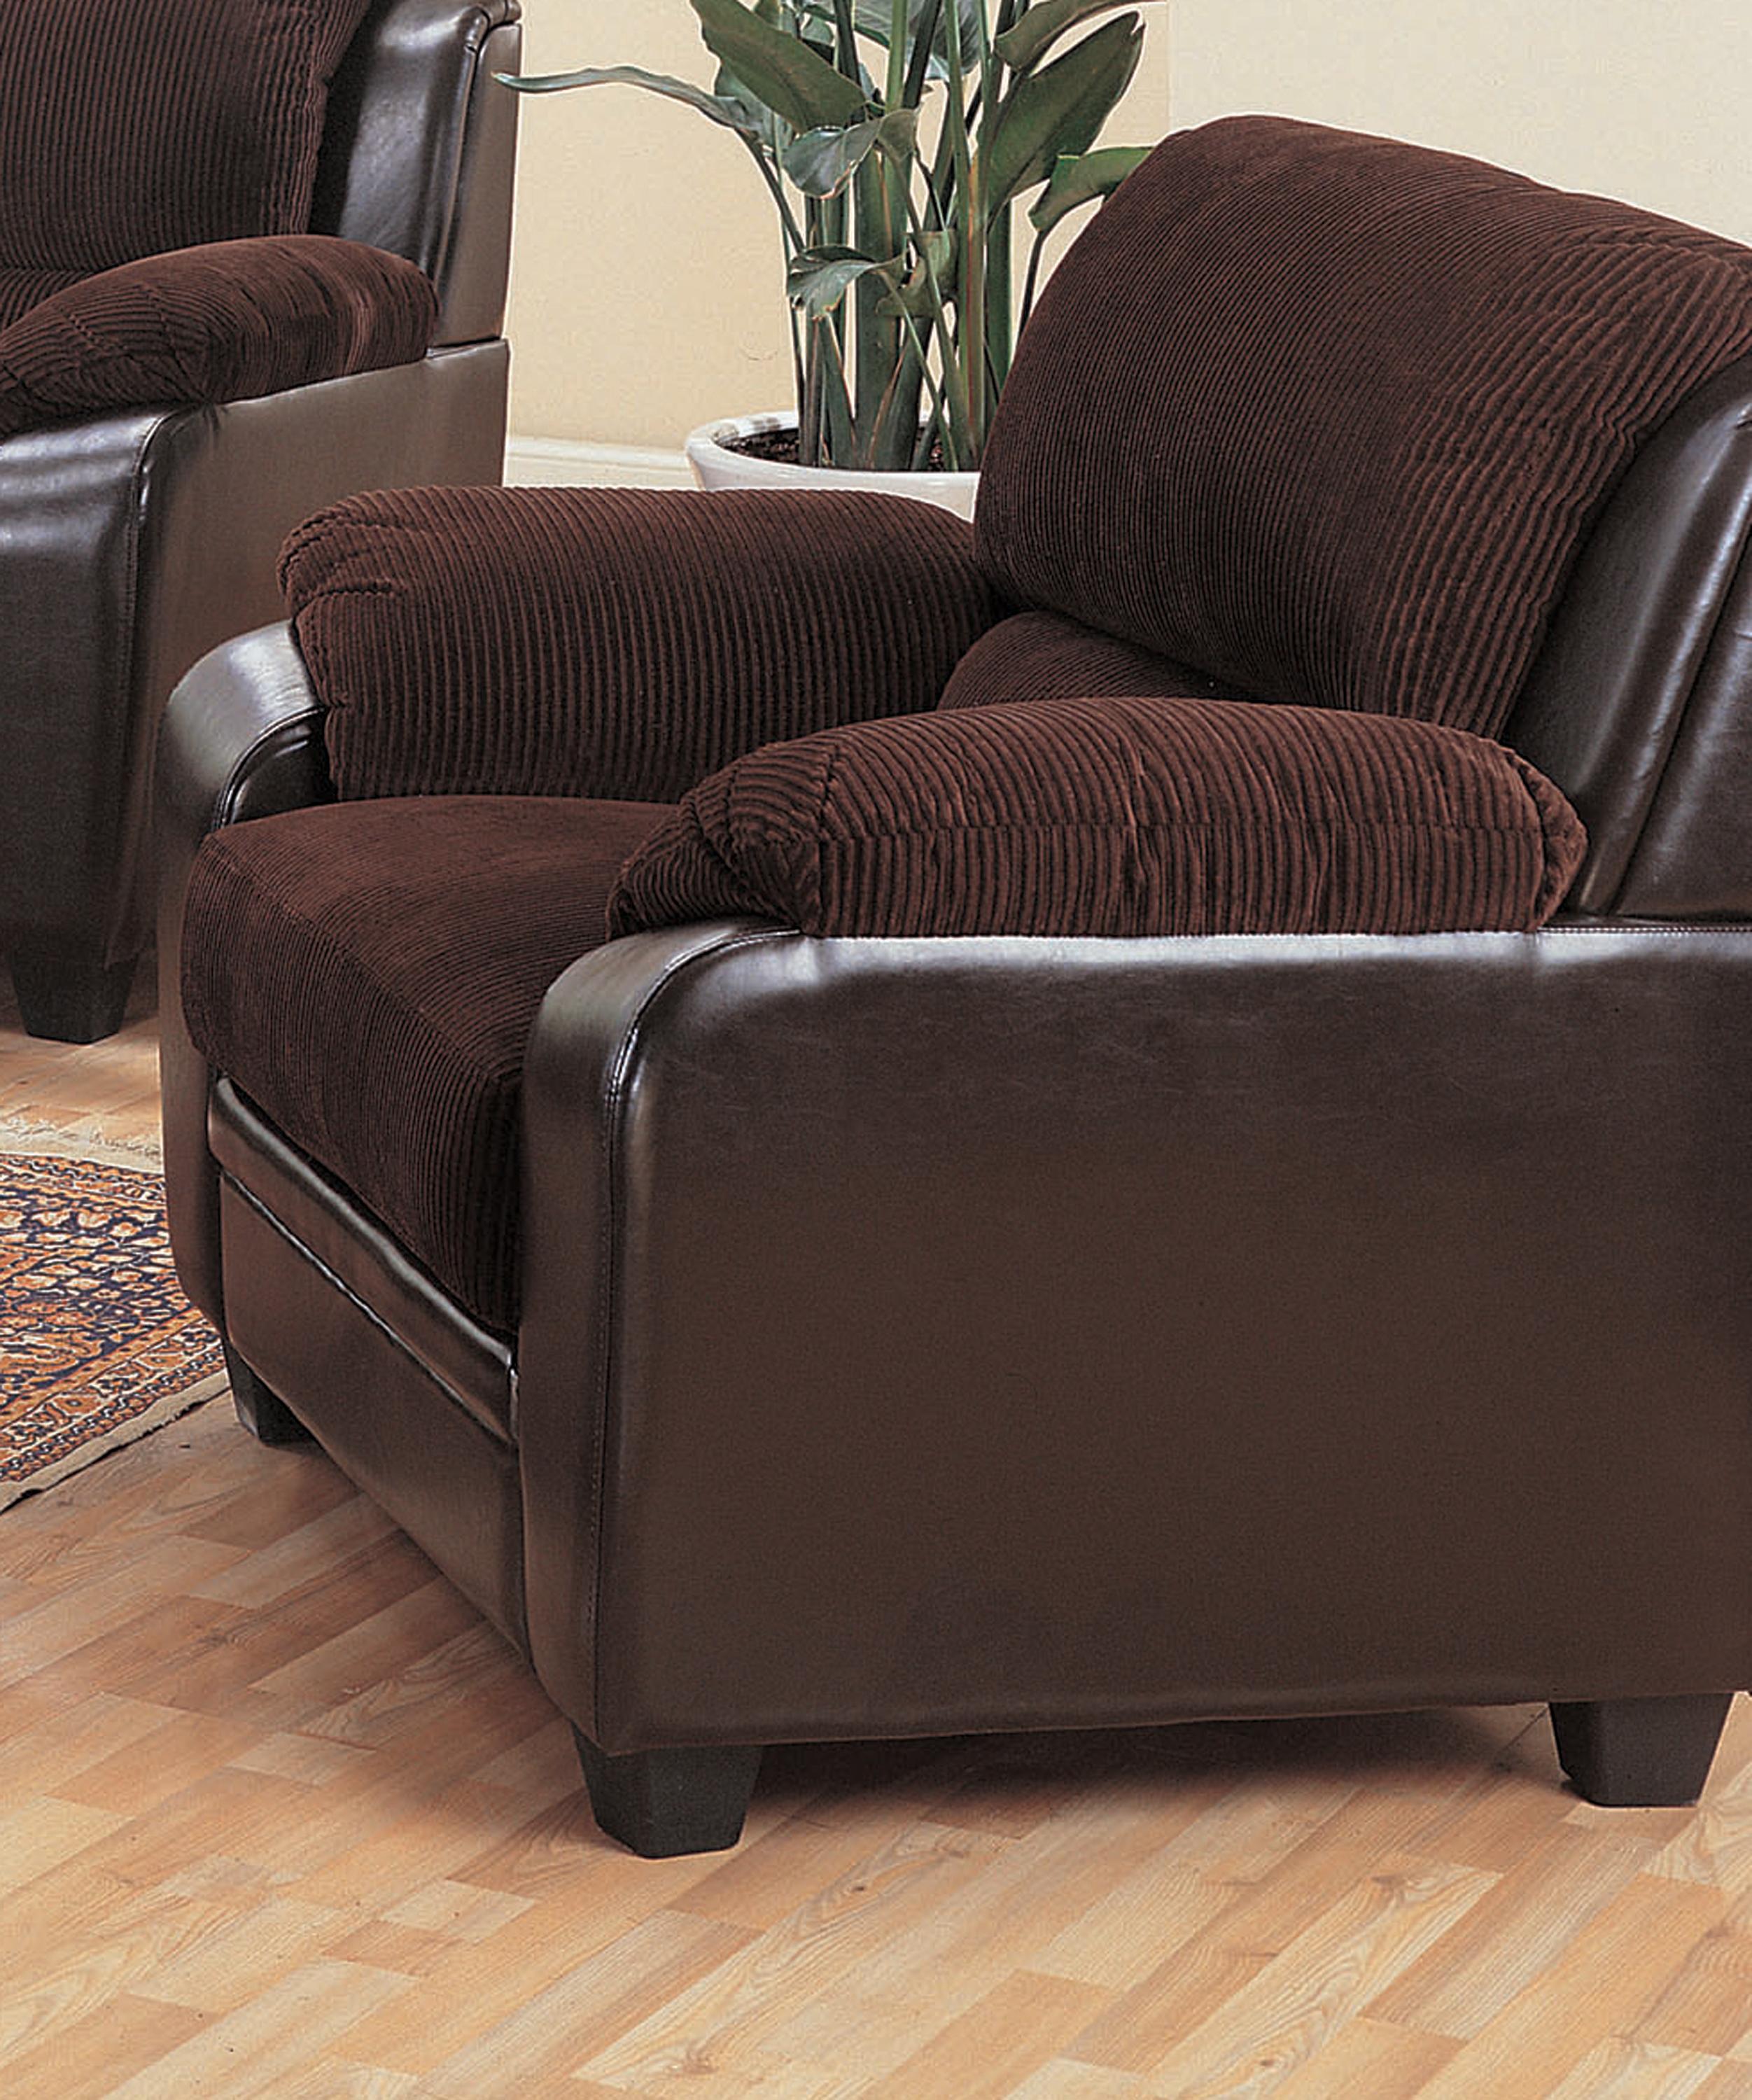 Contemporary Arm Chair 502813 Monika 502813 in Chocolate Leatherette